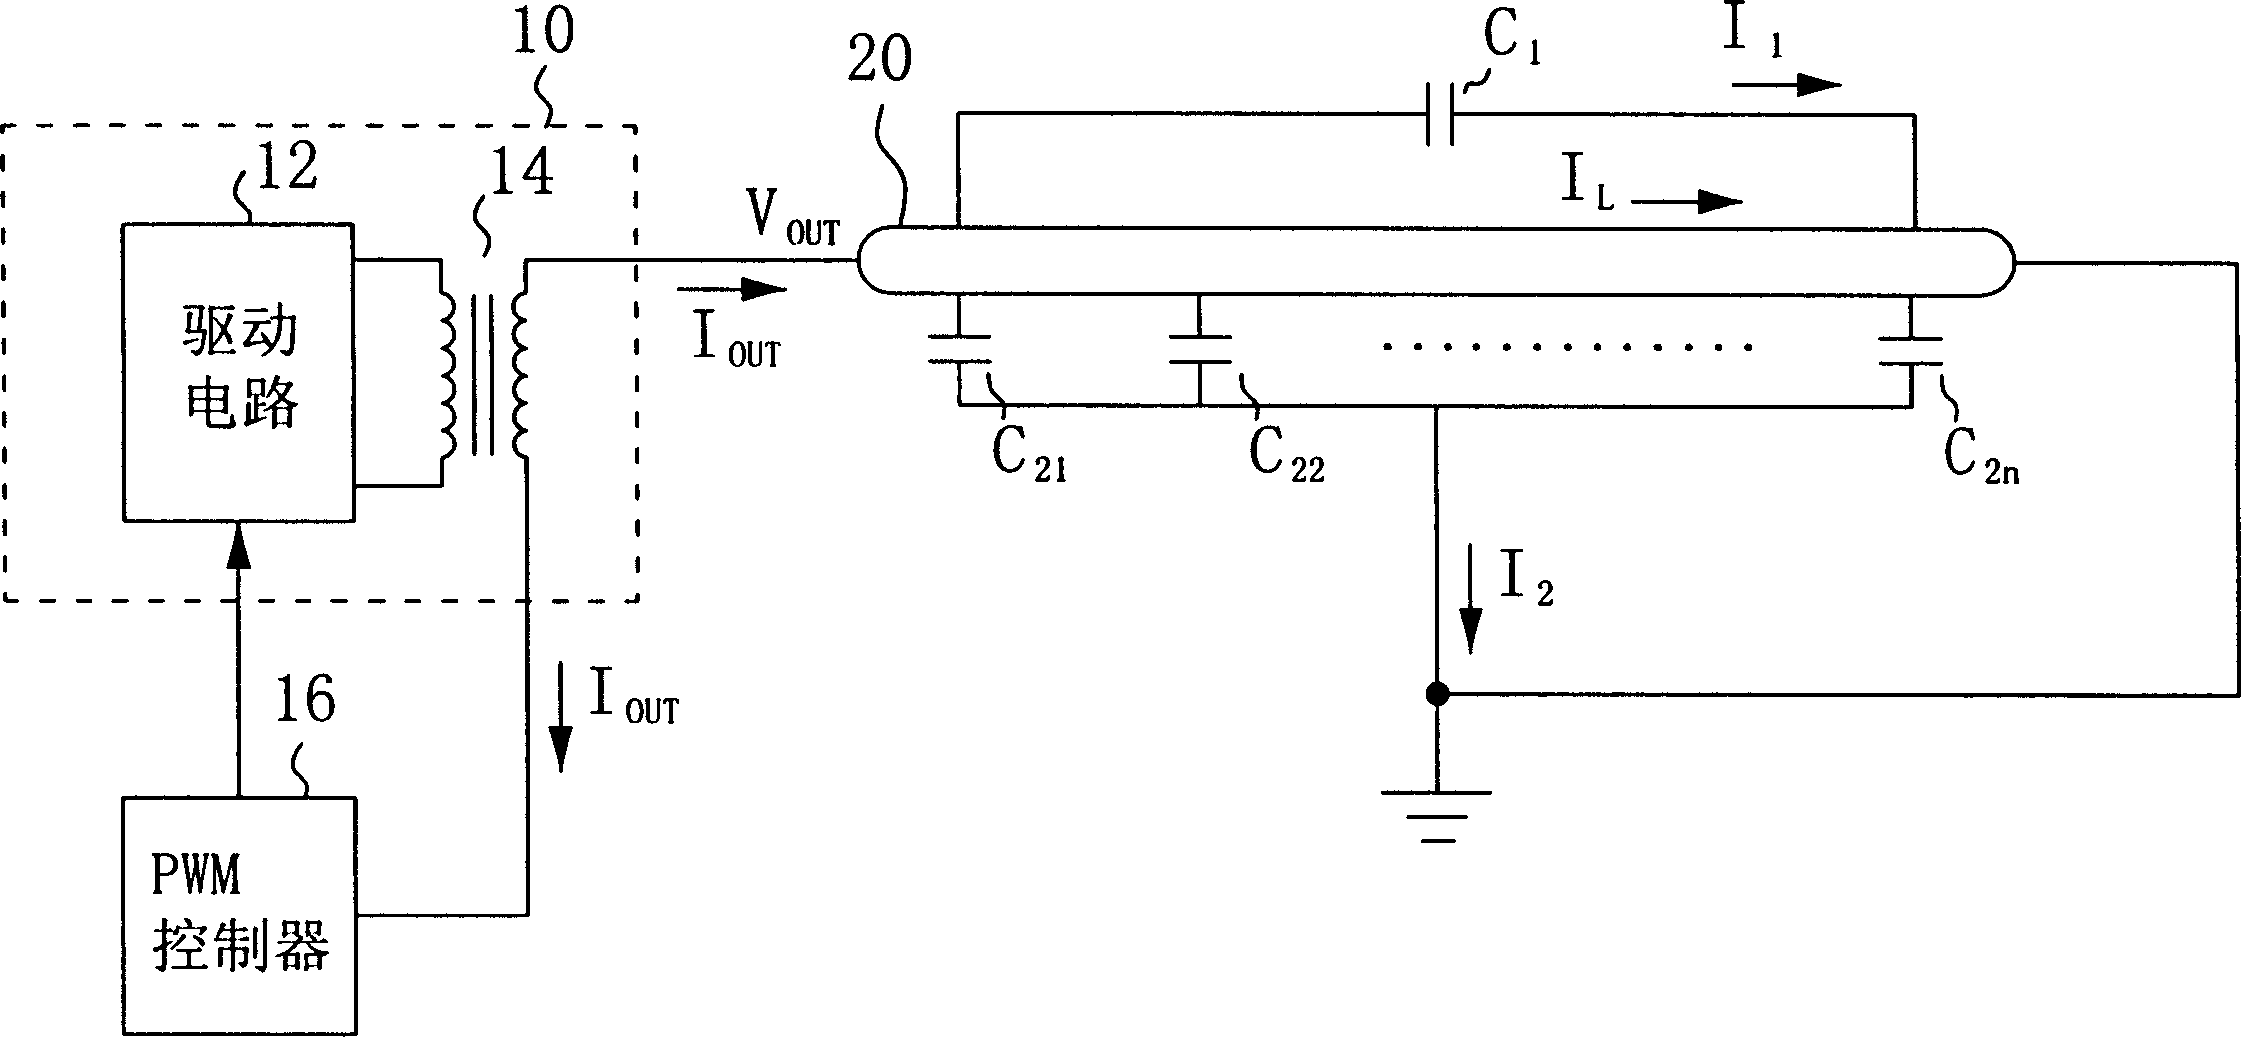 Feedback sampling control circuit for tube driving systems